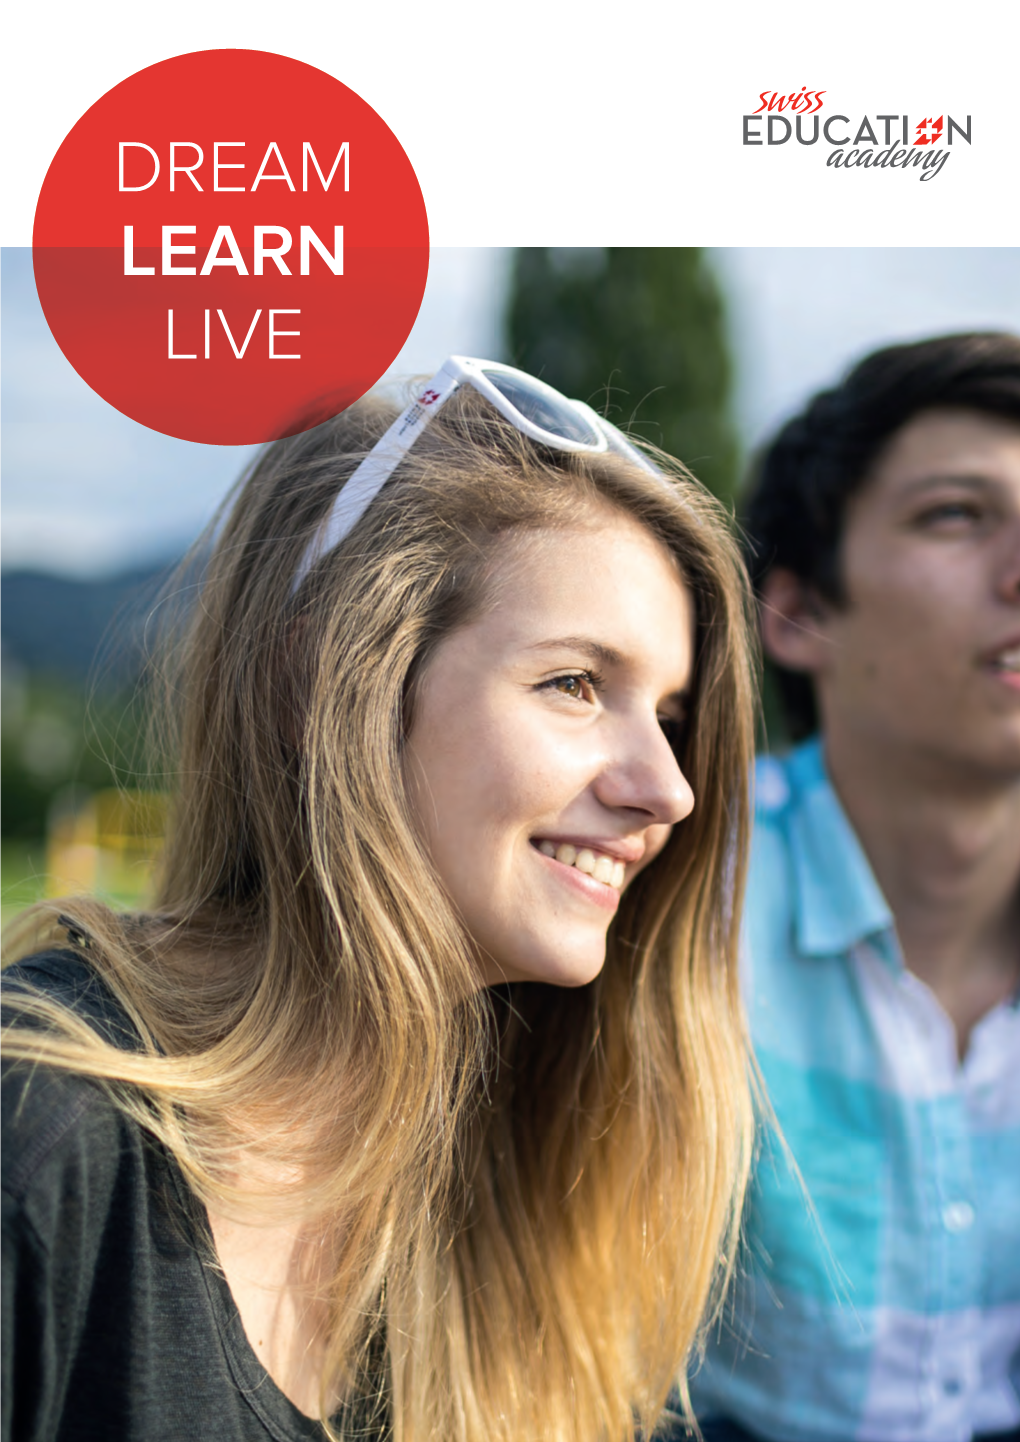 DREAM LEARN LIVE Who Is Swiss Education Academy?